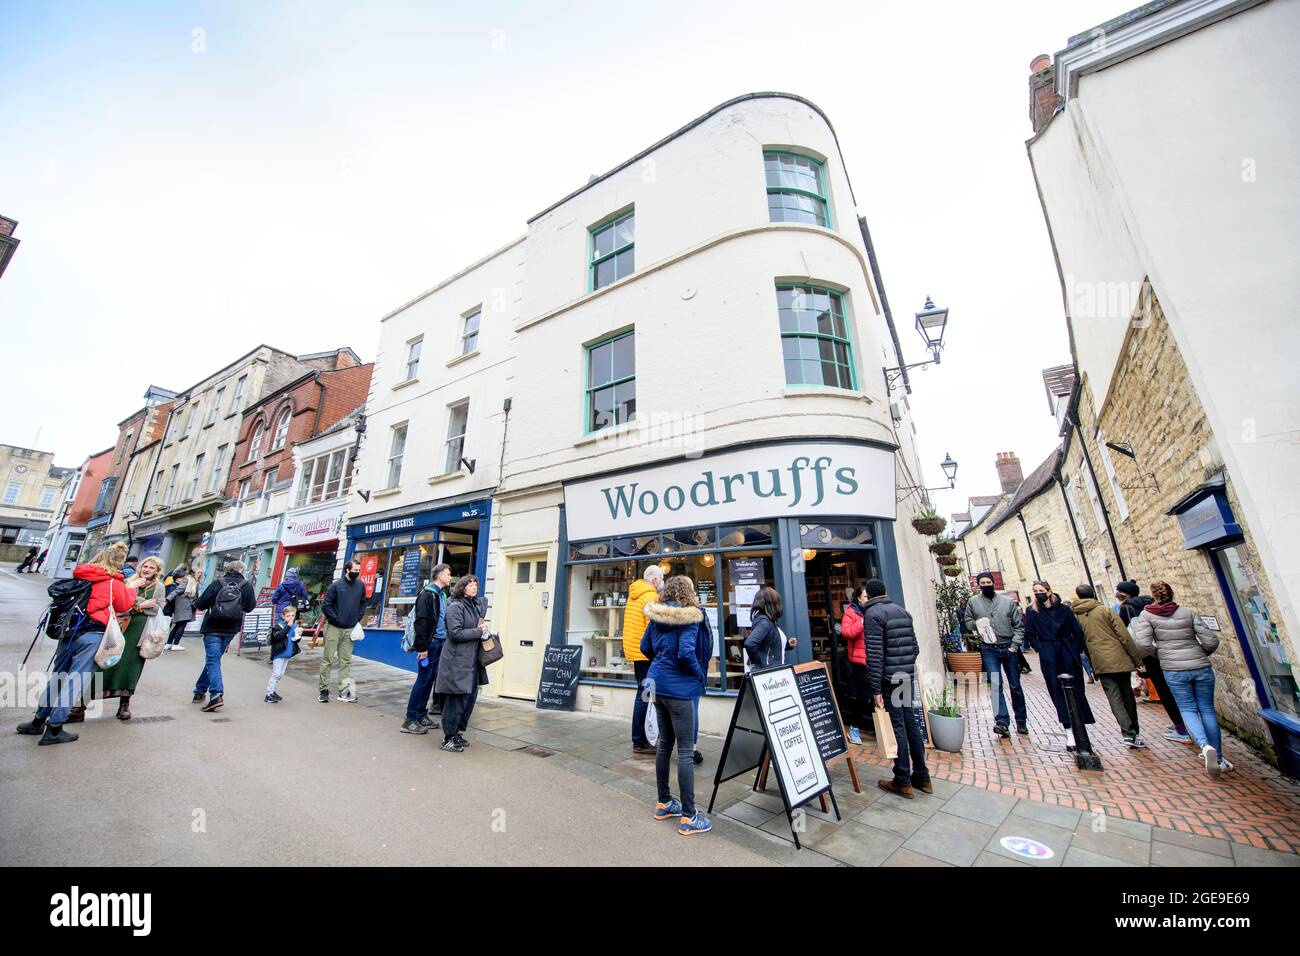 The town of Stroud in Gloucestershire - Woodruffs Organic Café Stock Photo